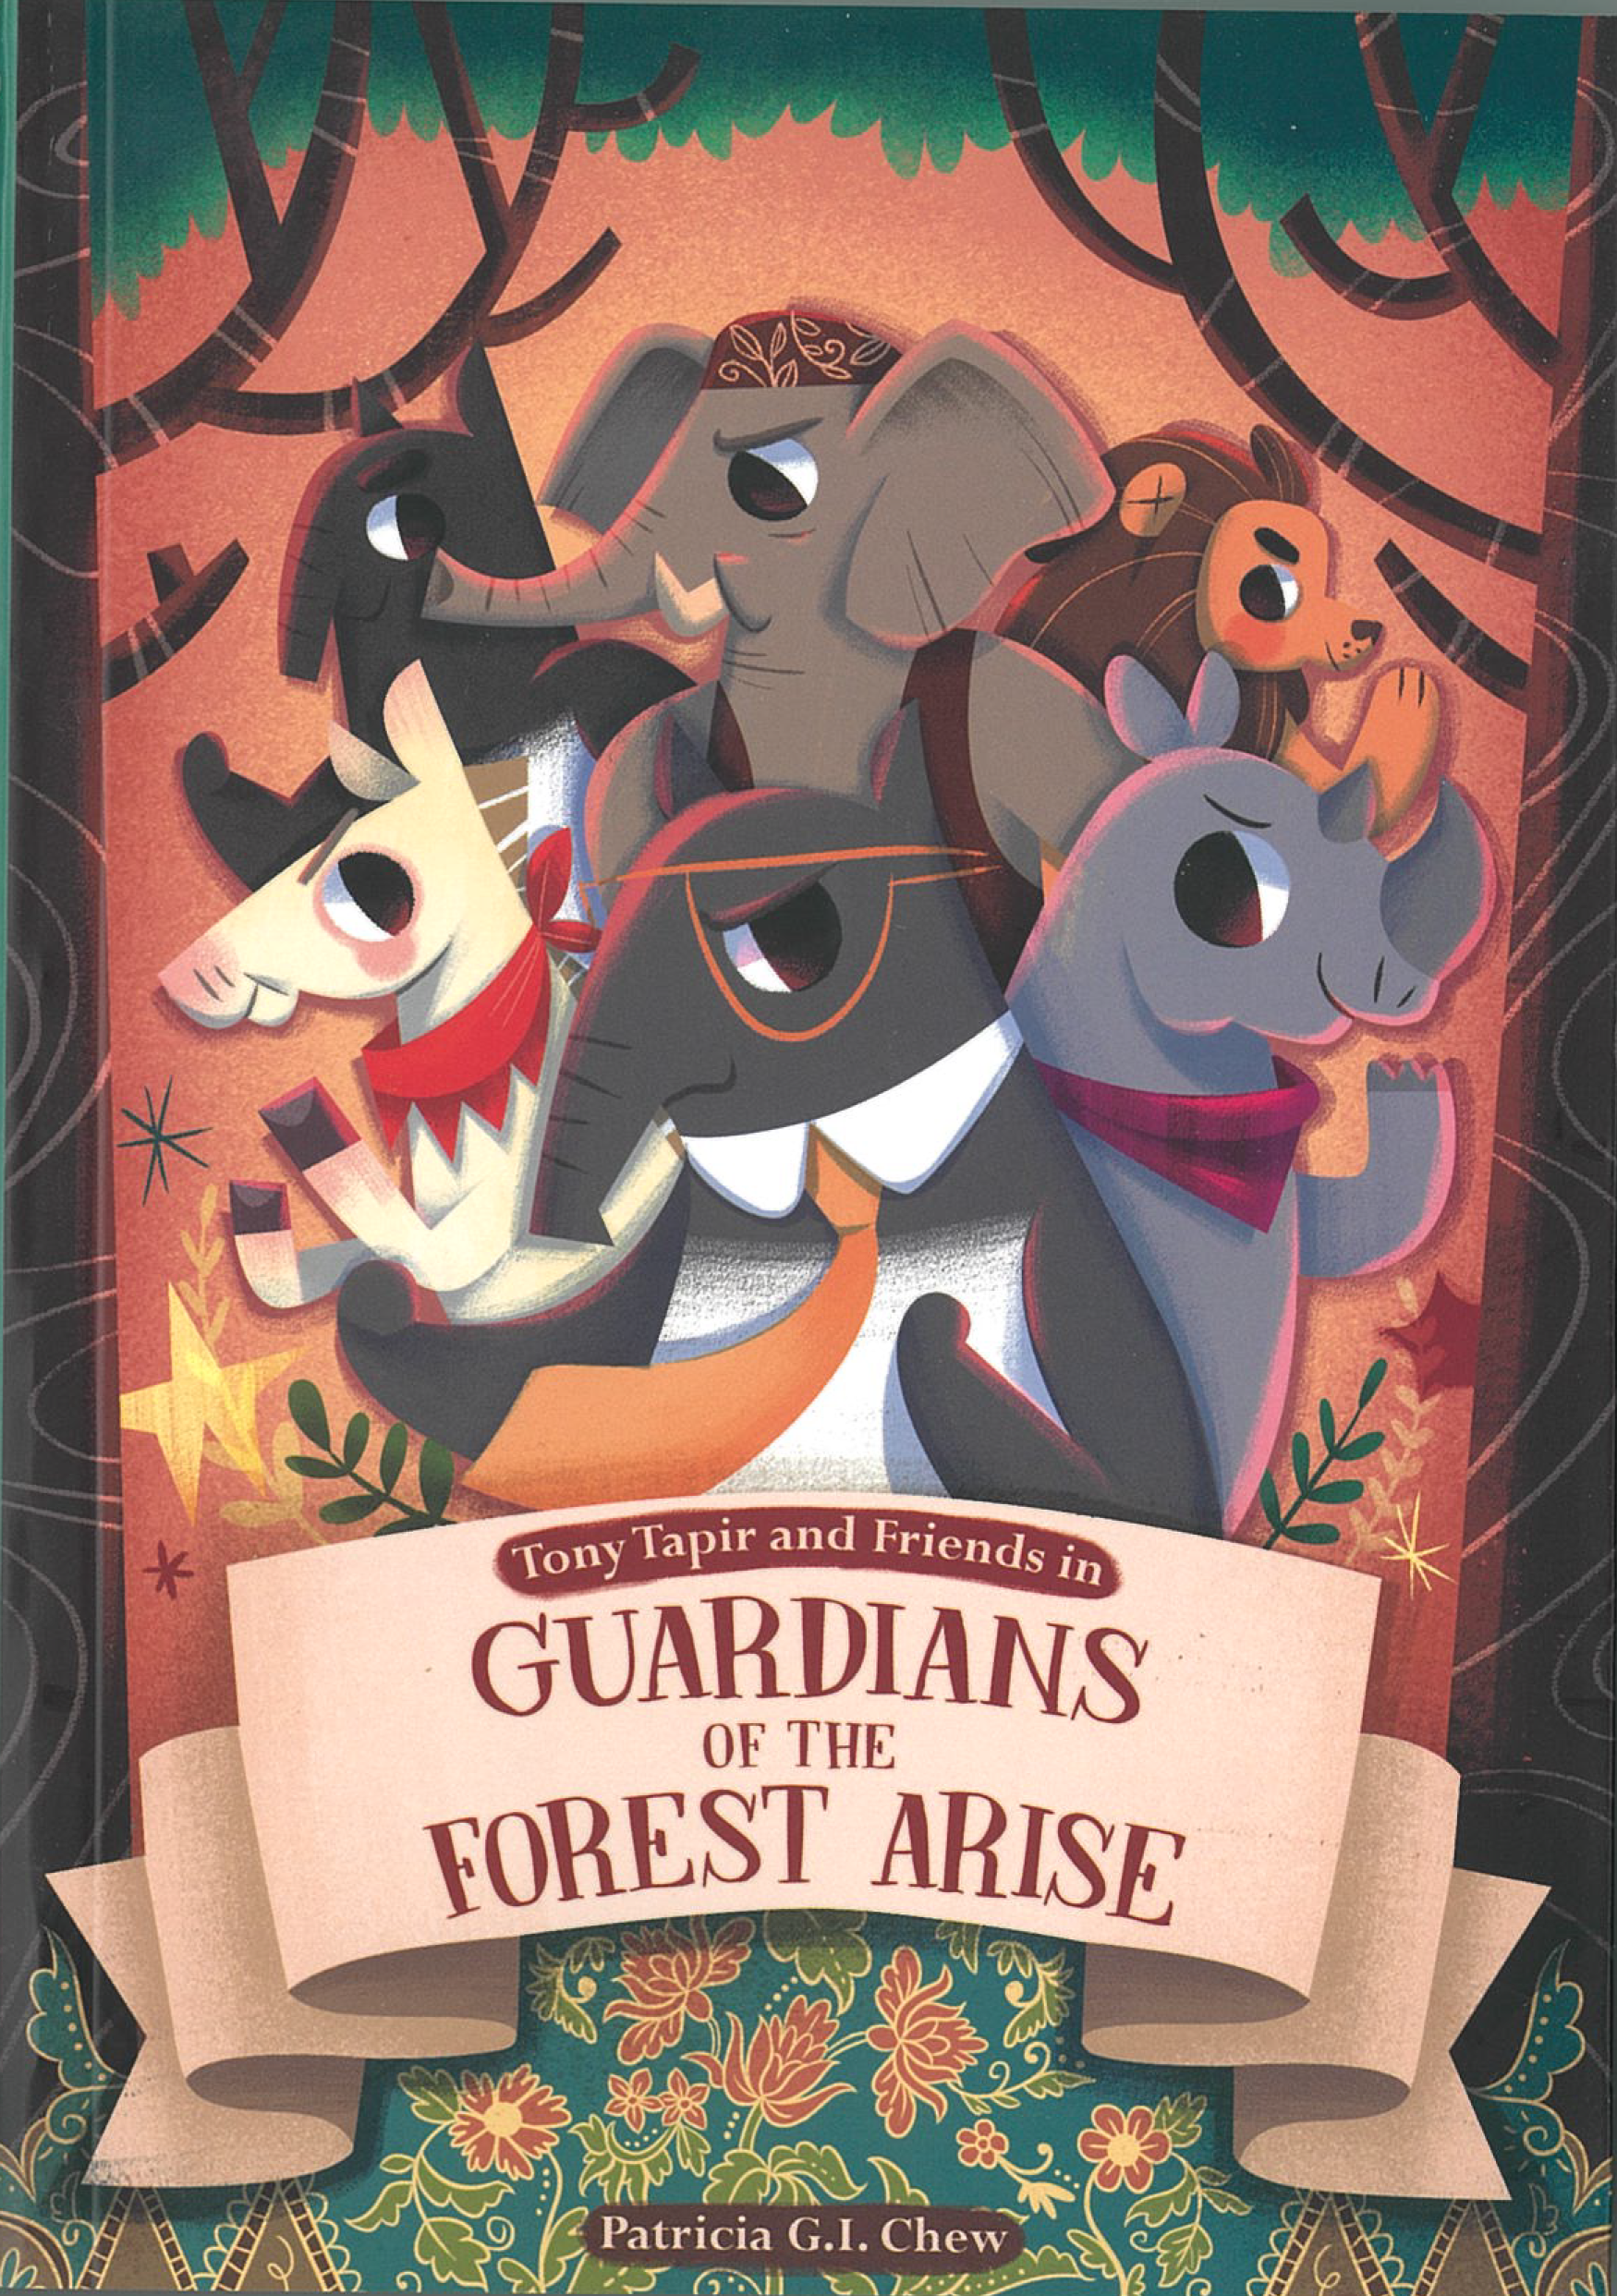 Guardians of the Forest Arise